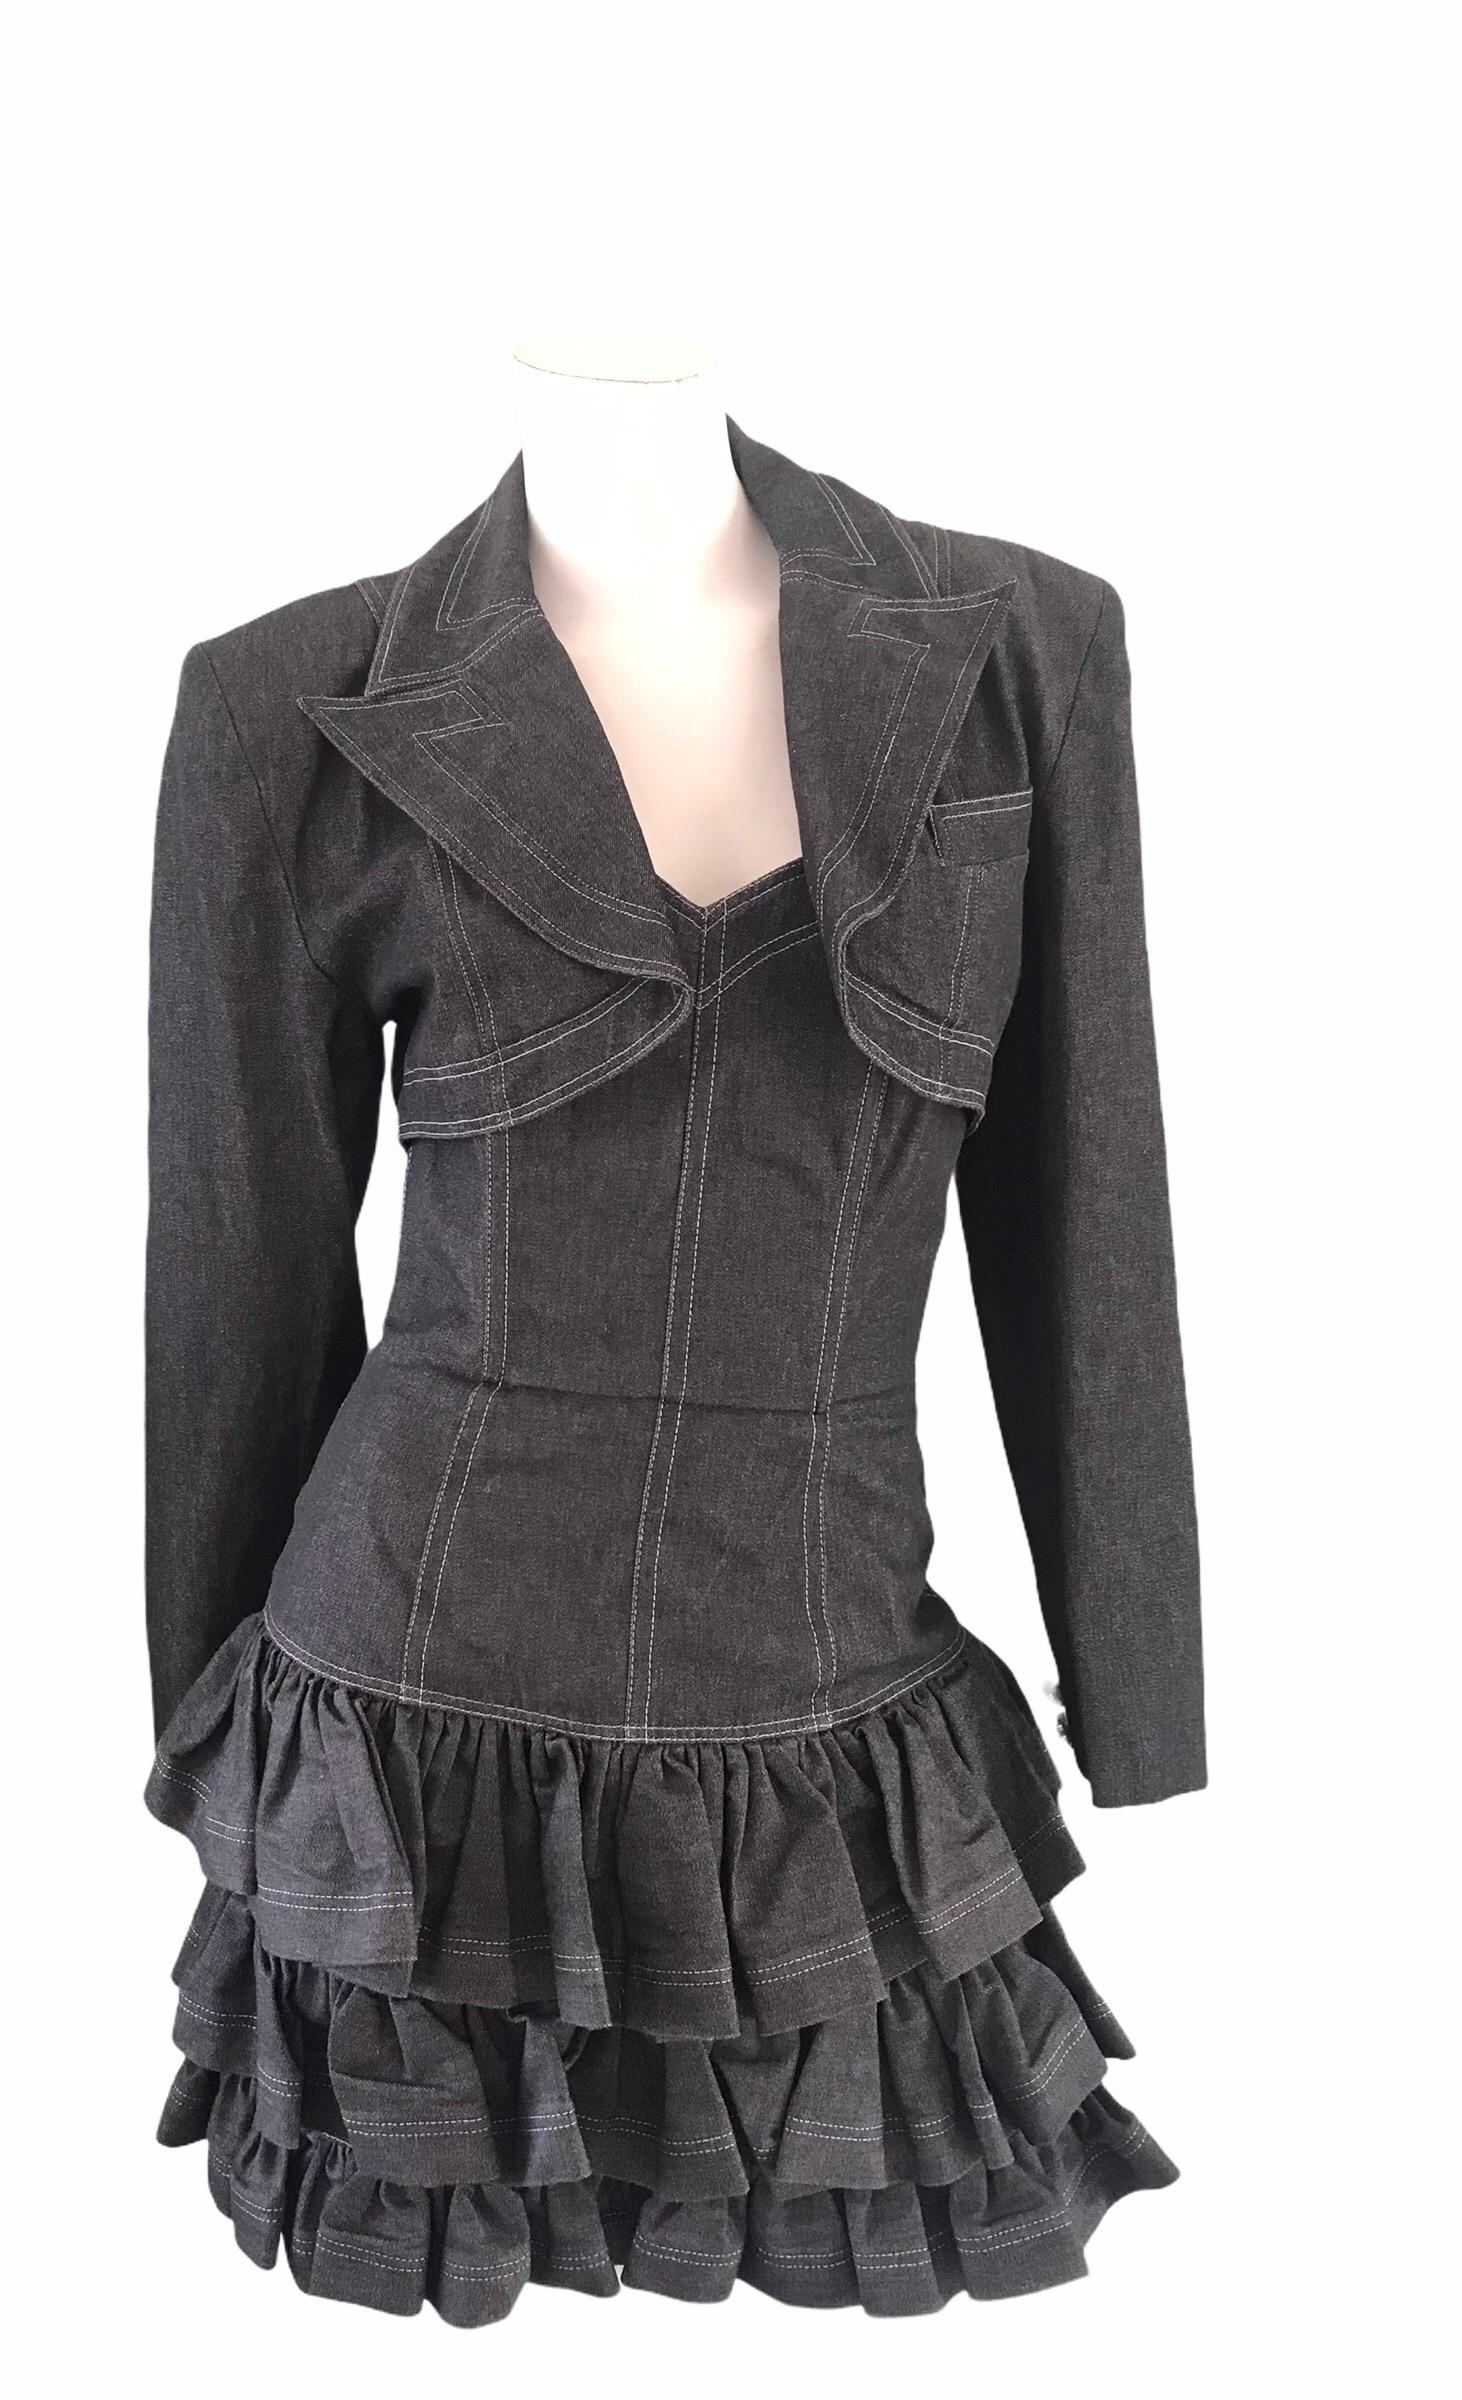 Patrick Kelly black denim strapless dress with cropped jacket. Condition: Excellent. Size S/M